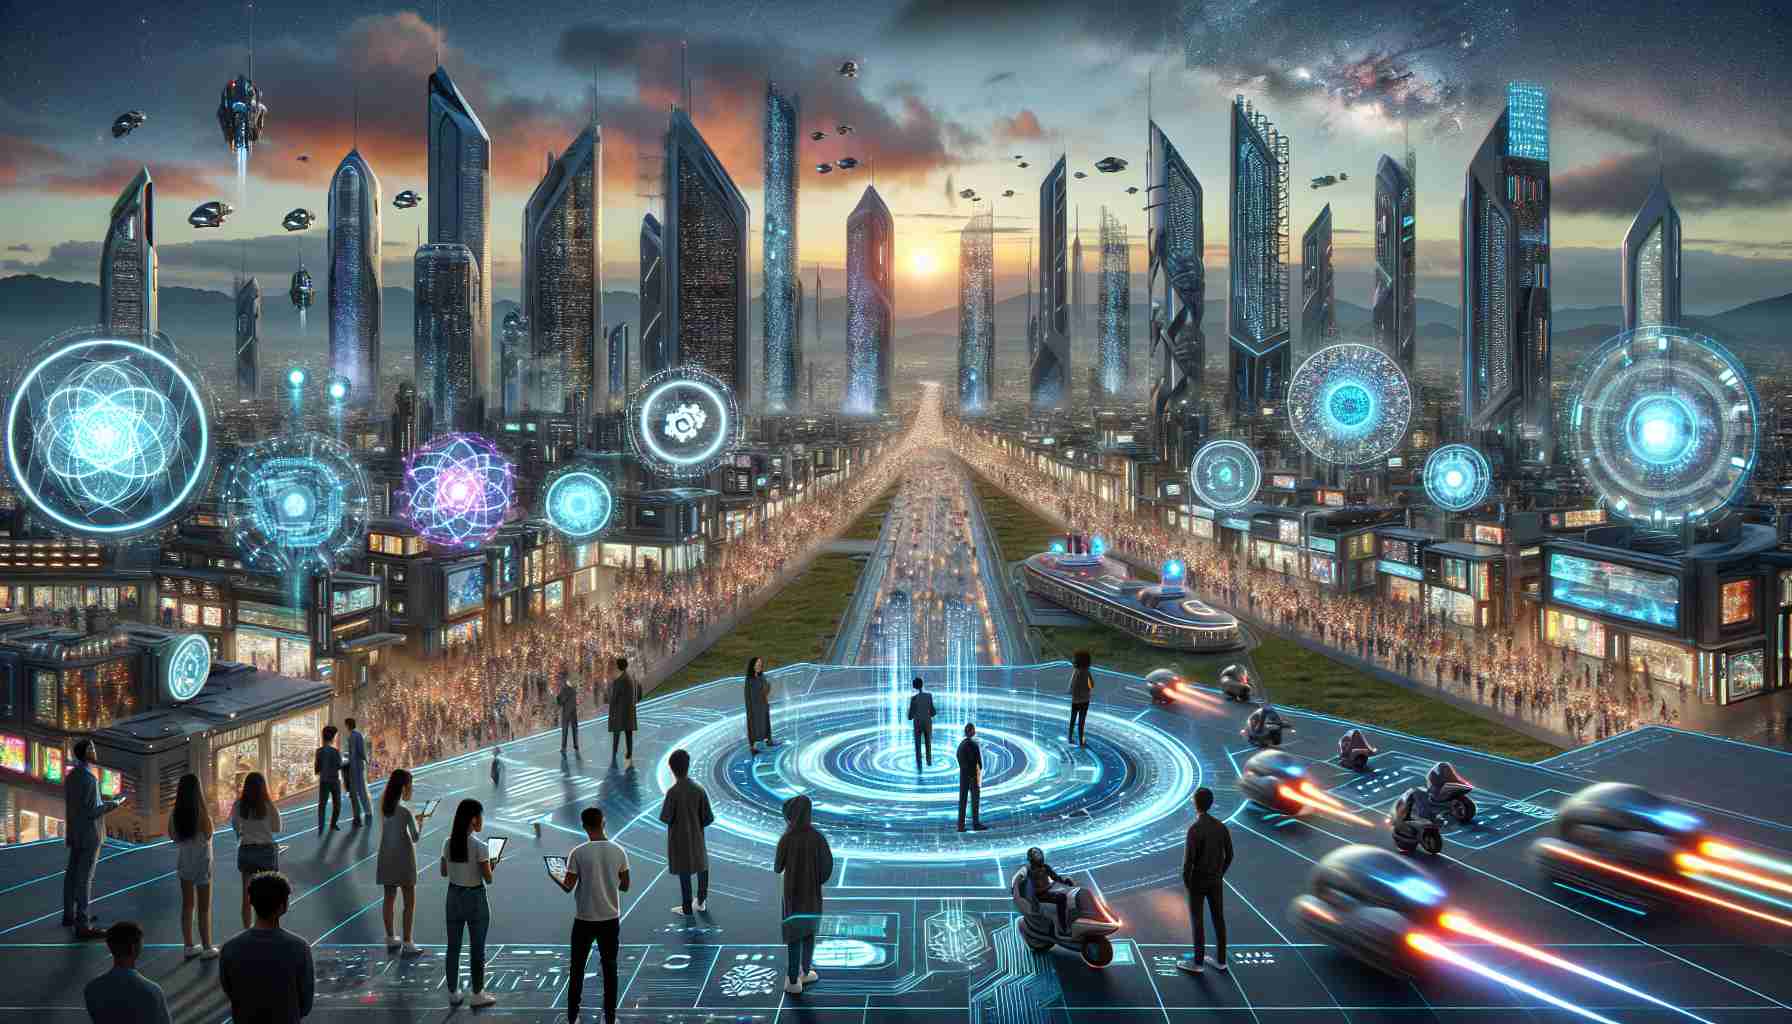 A detailed high-definition image showcasing the exploration of technology integration in the future. This sci-fi scene includes a vast array of advanced technologies integrated into a modern, futuristic cityscape with towering skyscrapers and holographic displays. Some people, both male and female of different descents such as Black, Hispanic, South Asian, and Caucasian, are seen interacting with these technologies, engaging with holographic interfaces or zooming around on autonomous hover vehicles. There should also be a clear emphasis on sustainability in this futurescape, with visible elements of renewable energy and green tech. All this under a breathtaking dusk sky, teeming with distant starships.